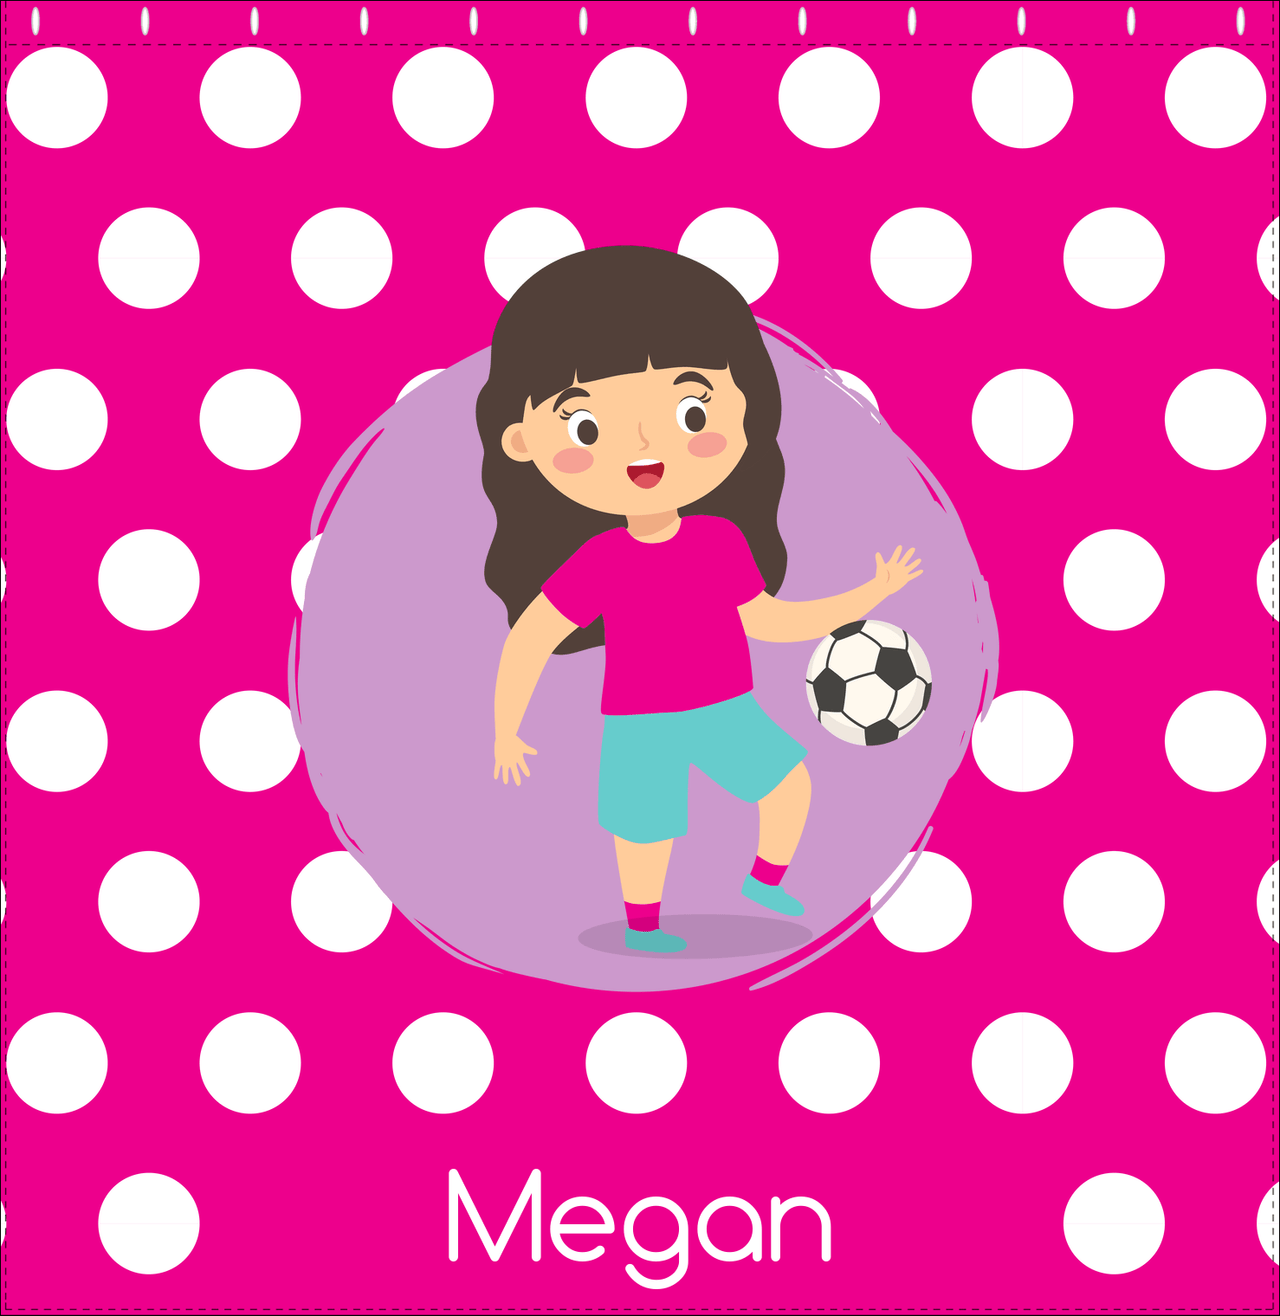 Personalized Soccer Shower Curtain XXIII - Pink Background - Black Hair Girl - Decorate View